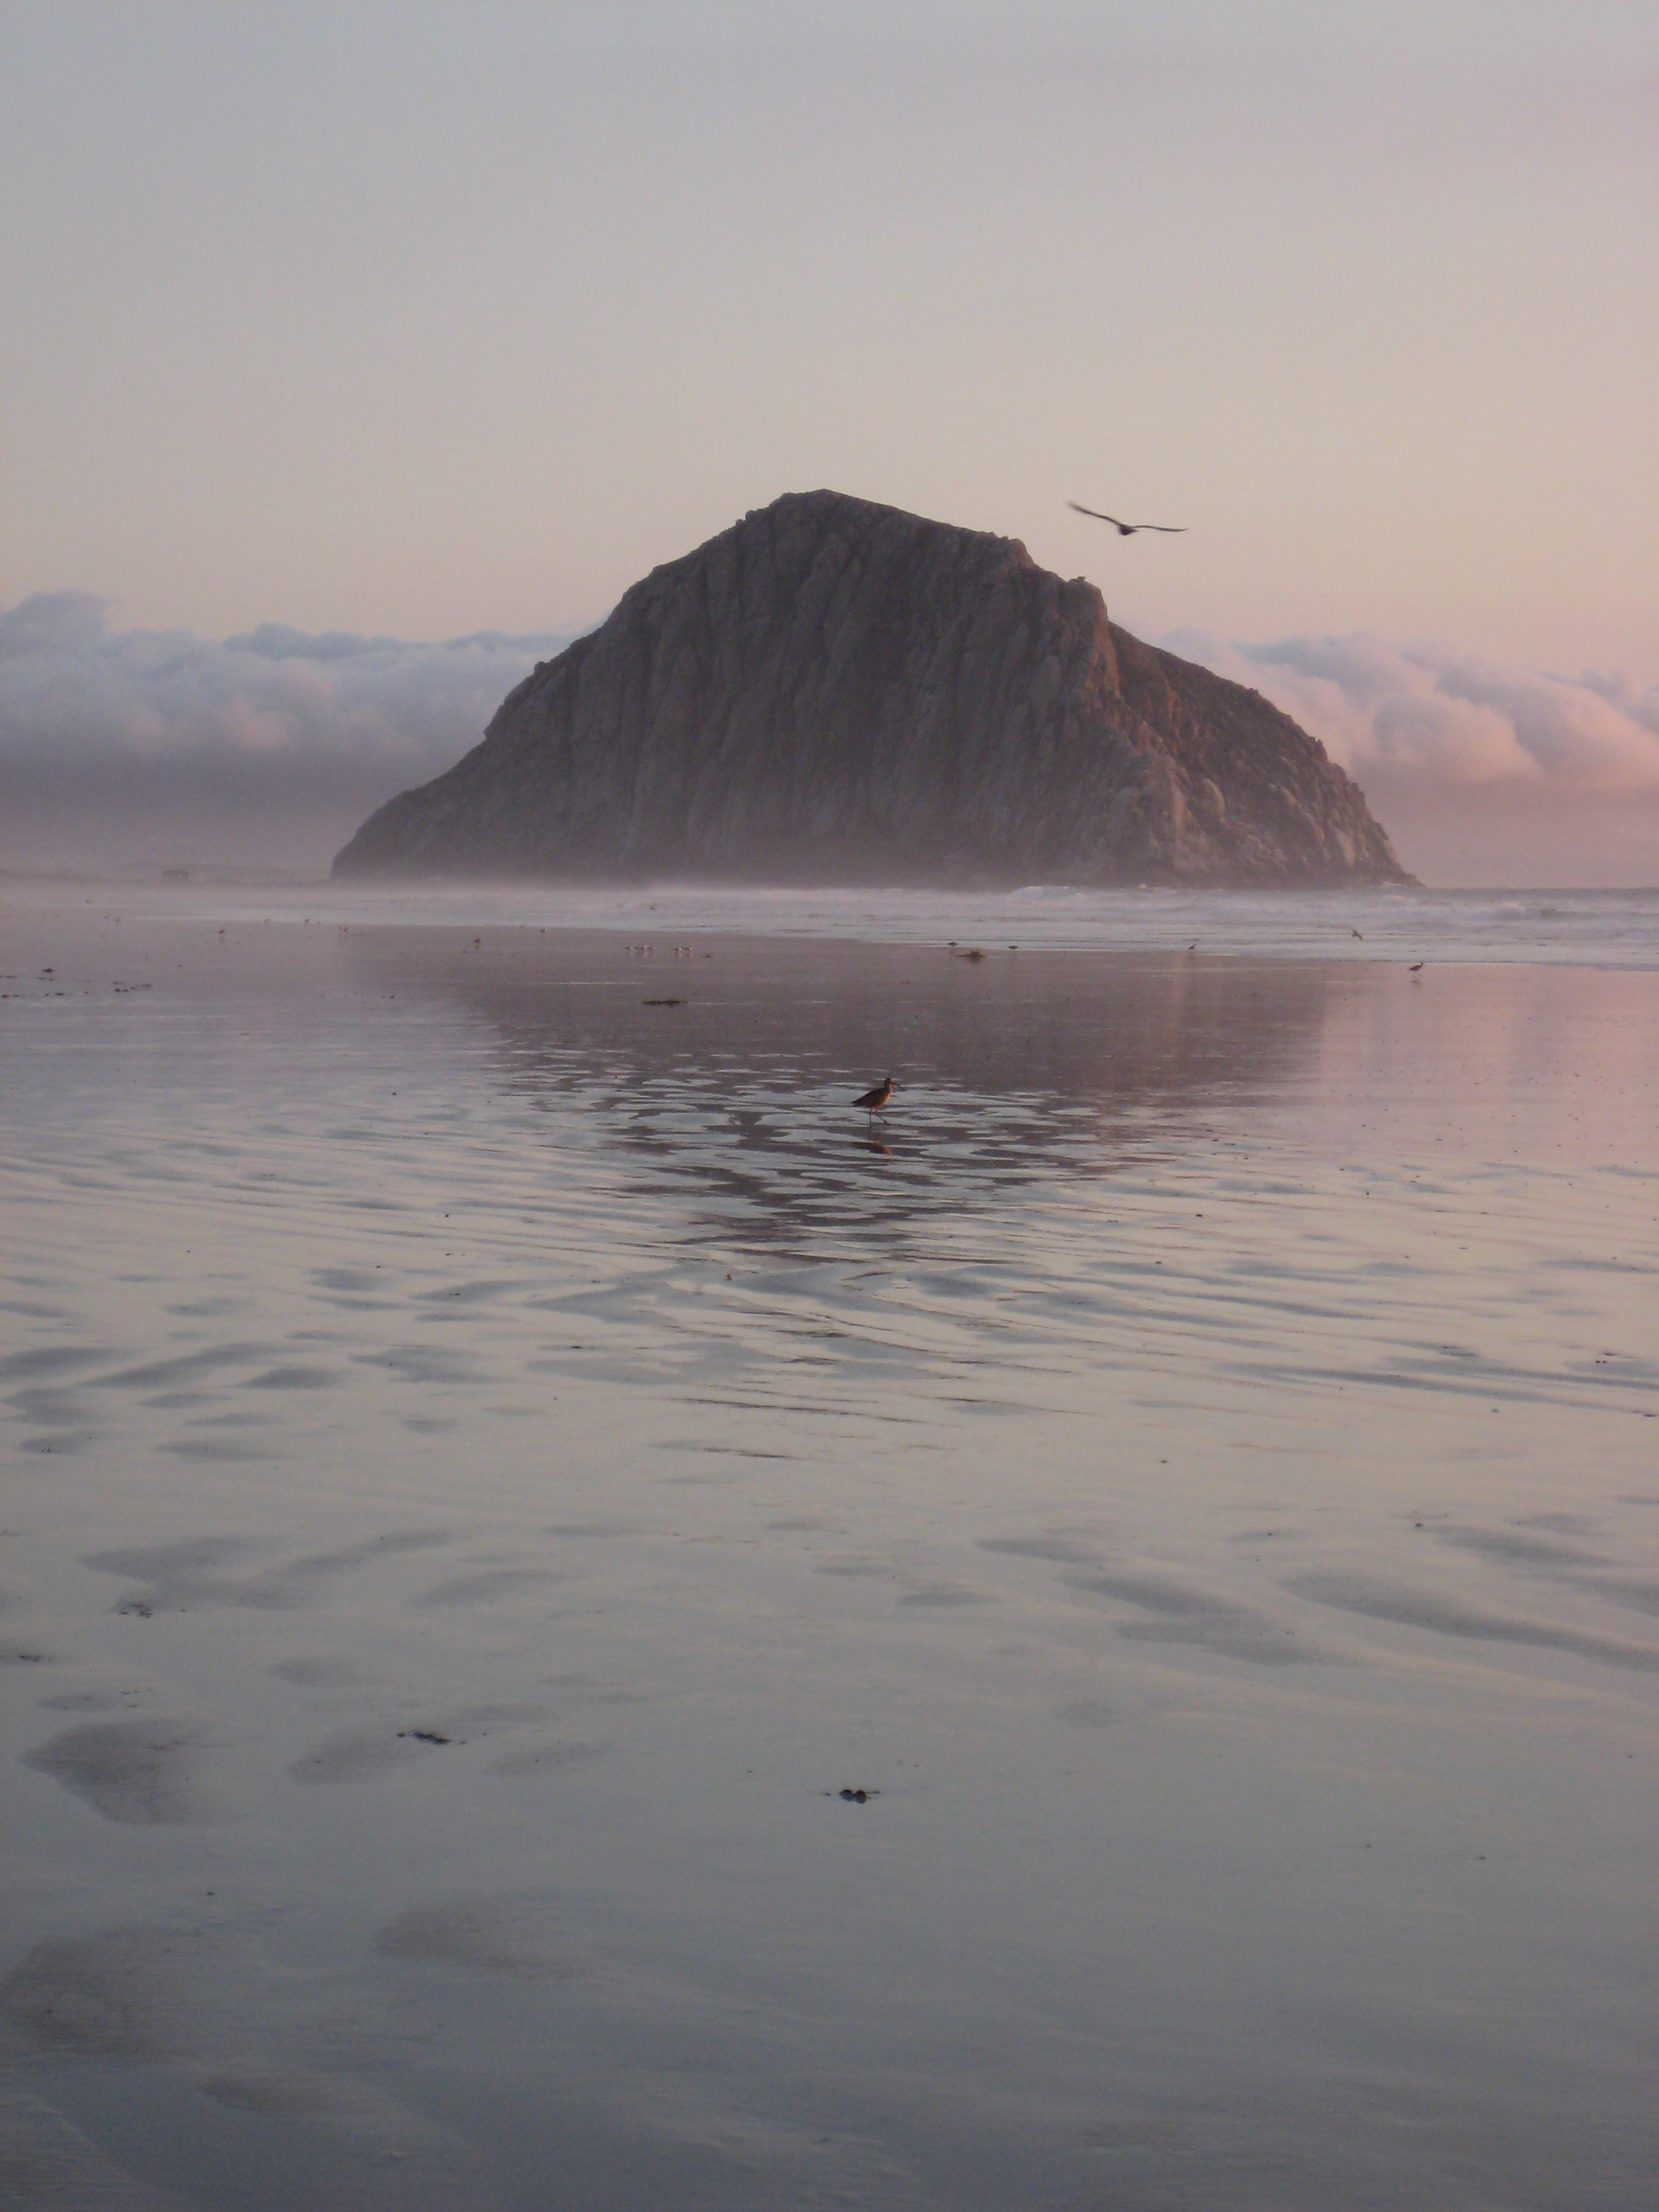 Morro Rock bathed in pink light and backed by fluffy white clouds on a dreamy evening. 